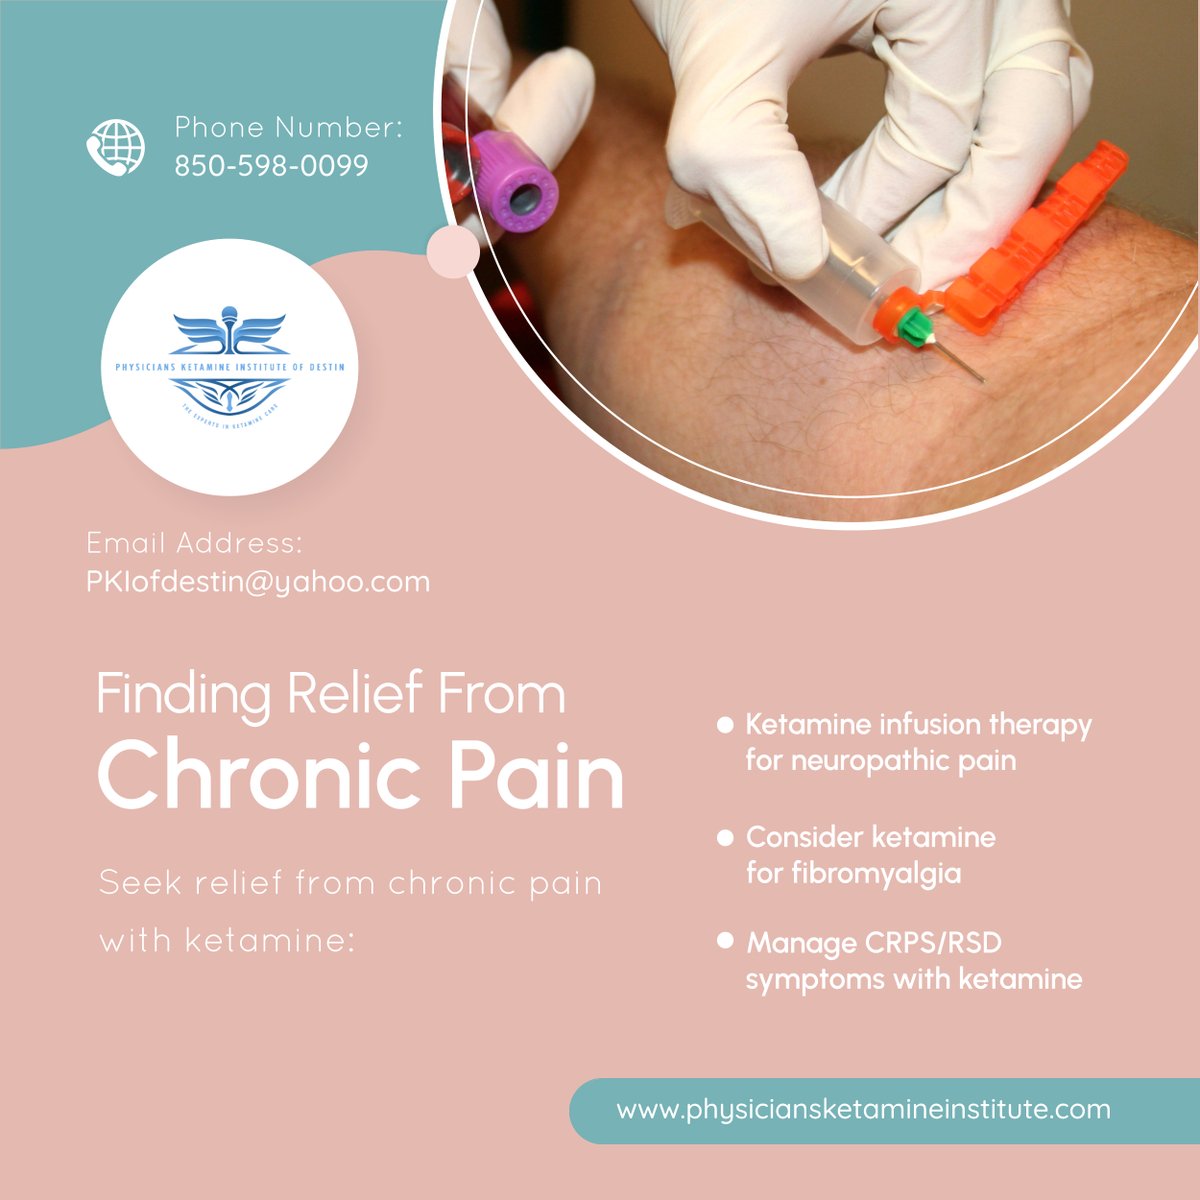 Don't let chronic pain hold you back. Explore the benefits of ketamine therapy for neuropathic pain, fibromyalgia, and CRPS/RSD. 

Discover more here: tinyurl.com/8k4fvf9a. 

#ChronicPainRelief #IVKetamineTherapy #DestinFL